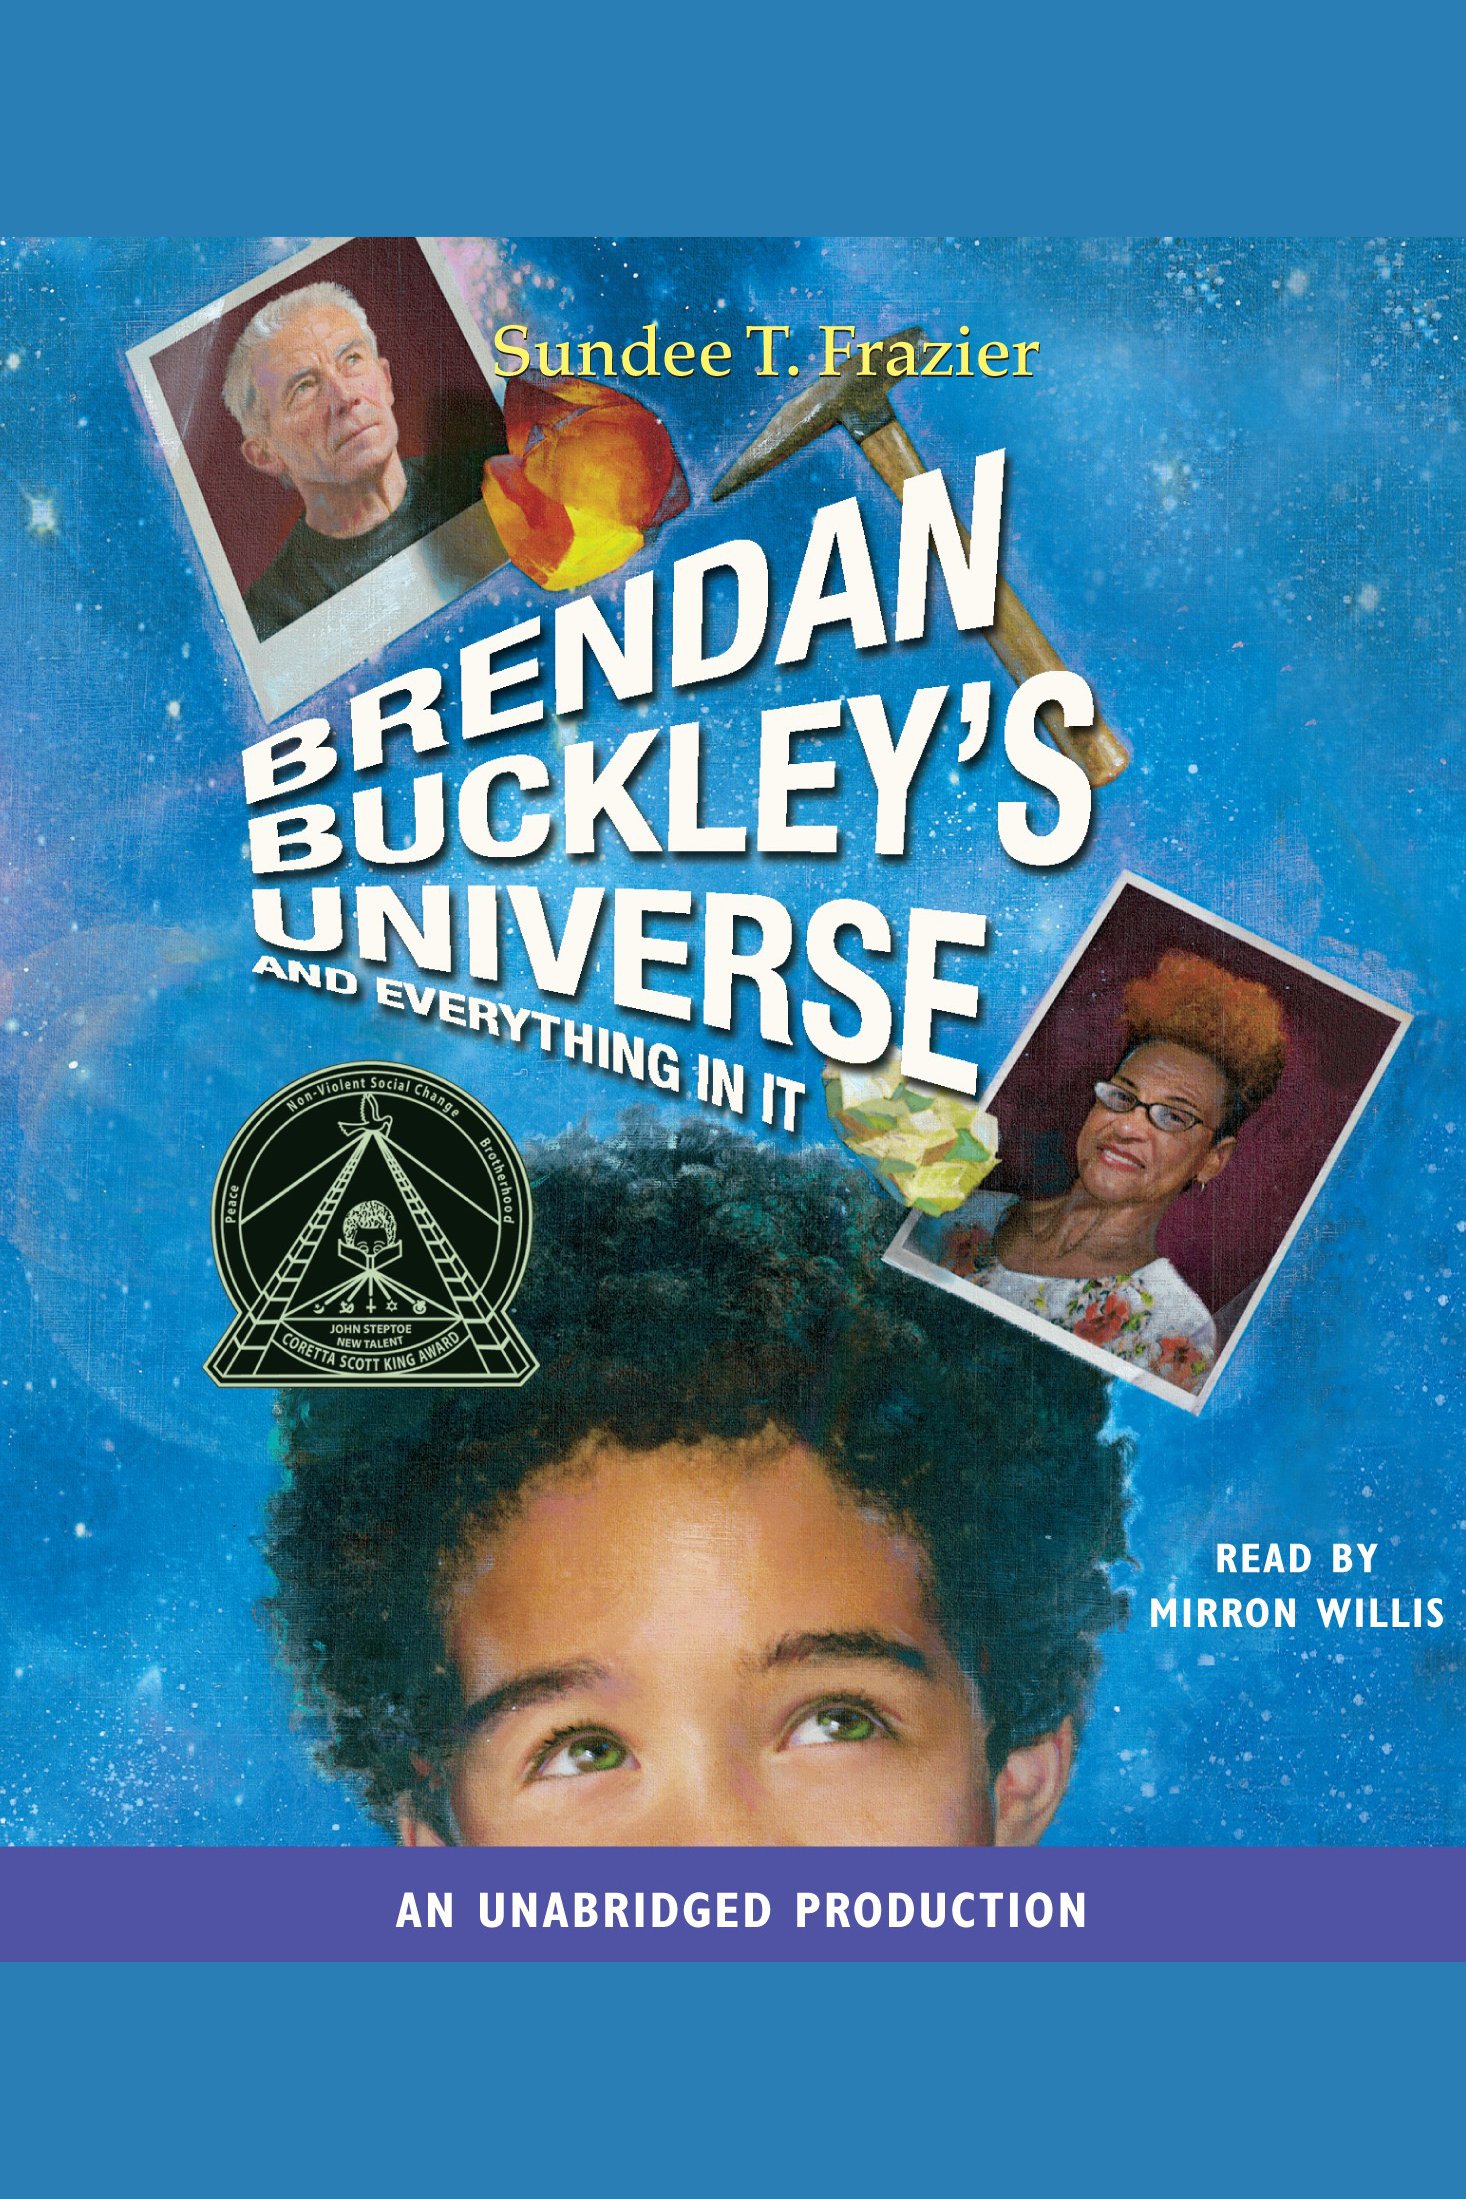 Brendan Buckley's universe and everything in it cover image